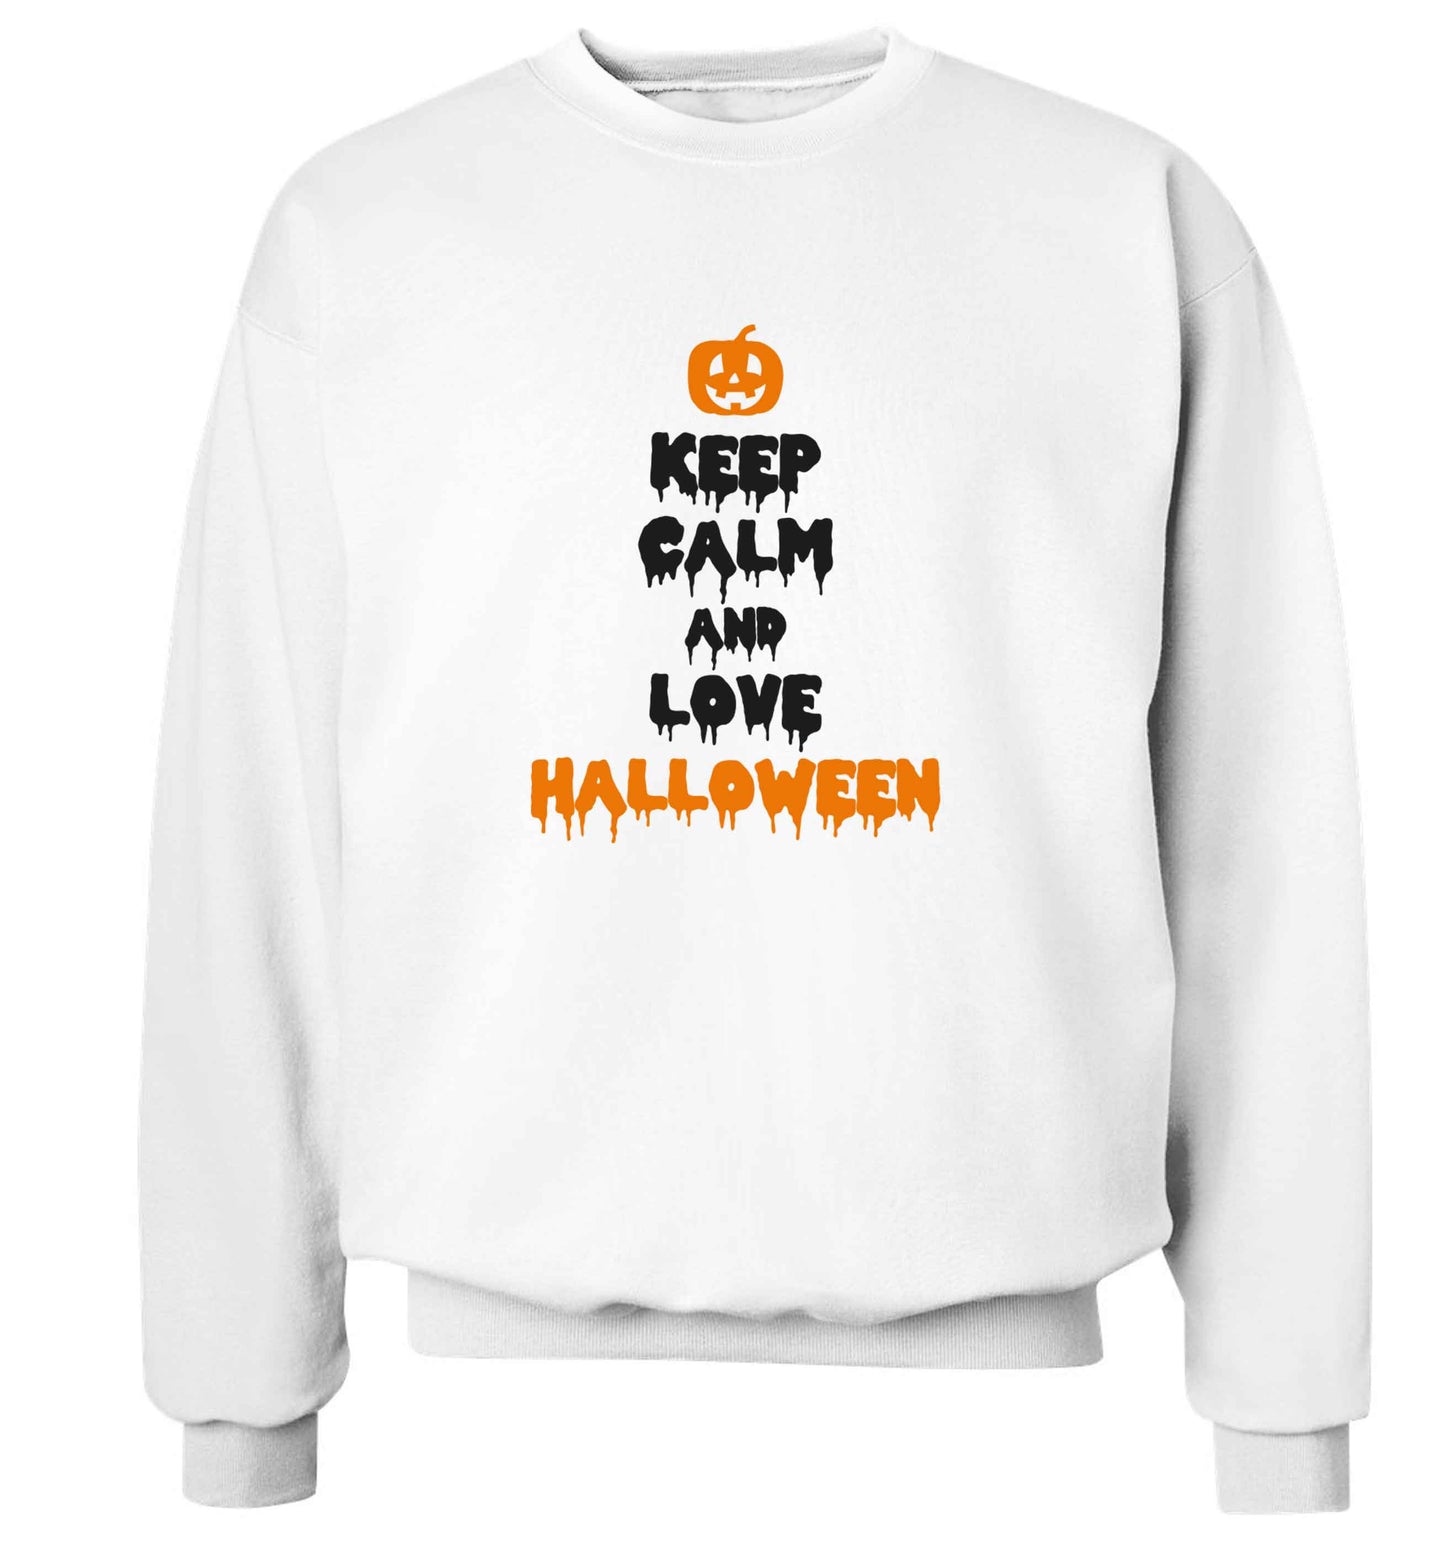 Keep calm and love halloween adult's unisex white sweater 2XL